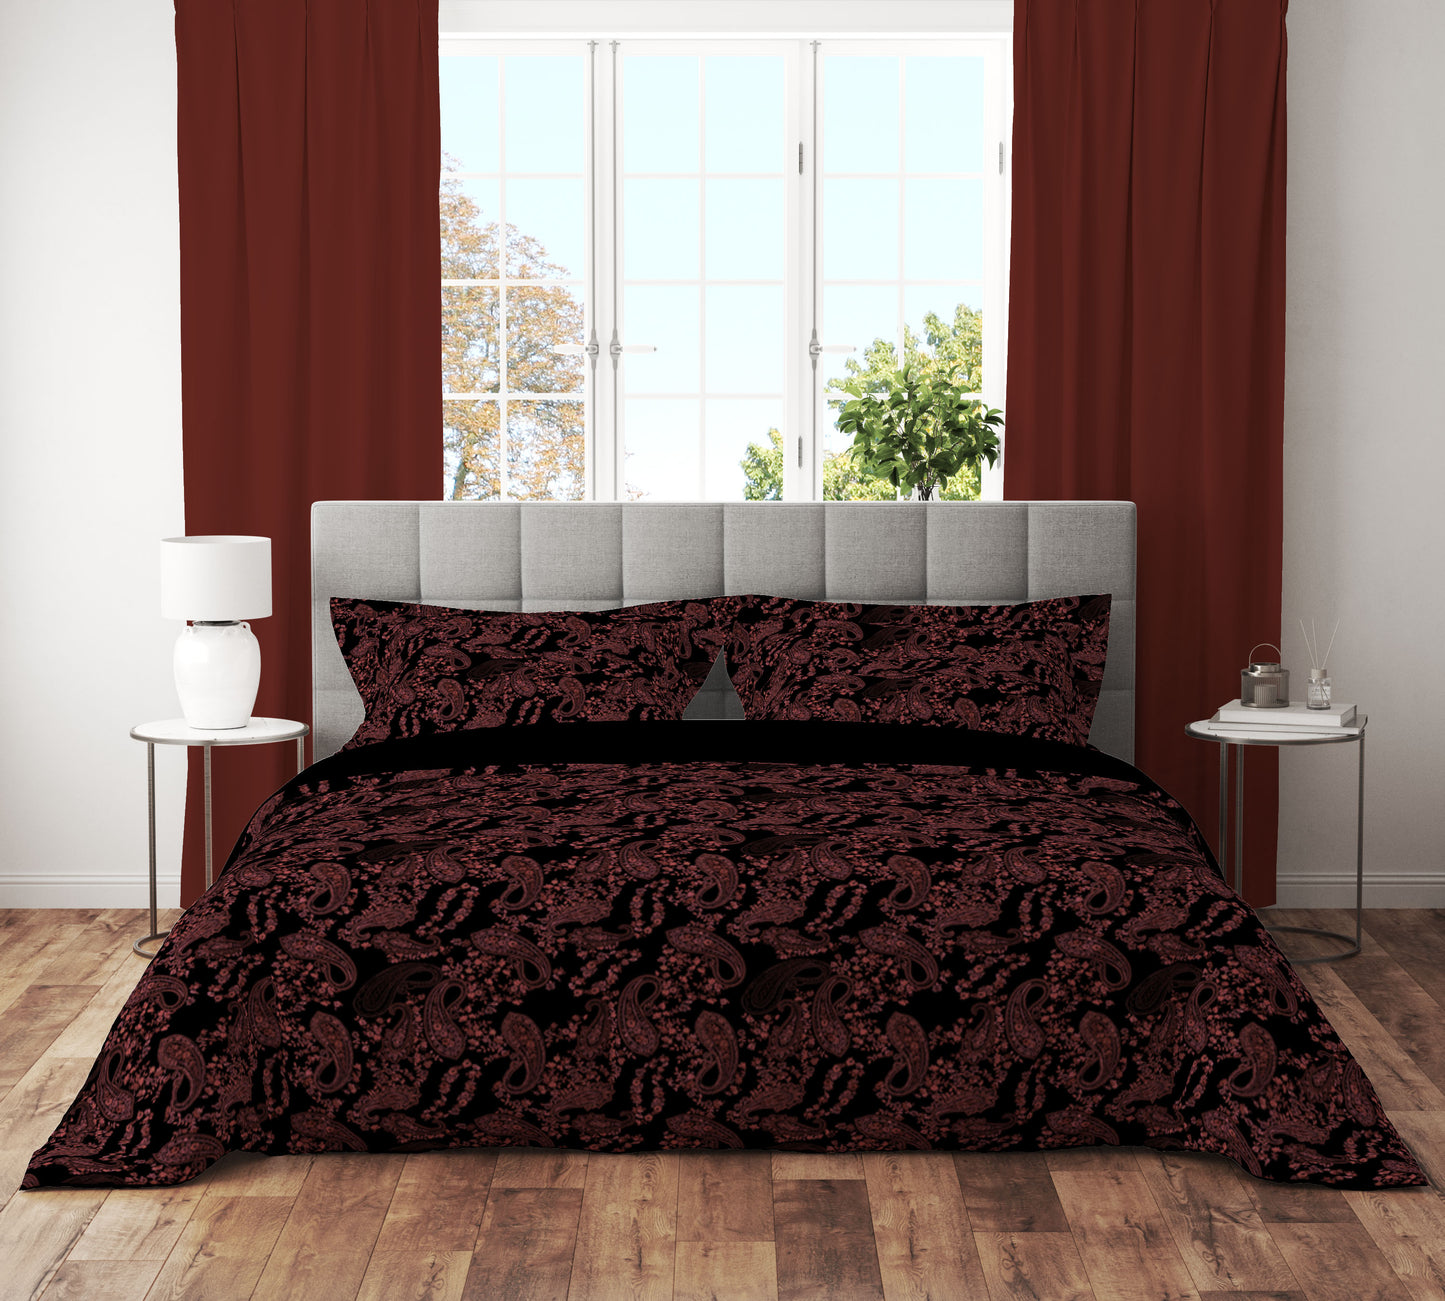 Red Paisley - Elegance Meets Drama for a Chic Bedroom Upgrade King Size